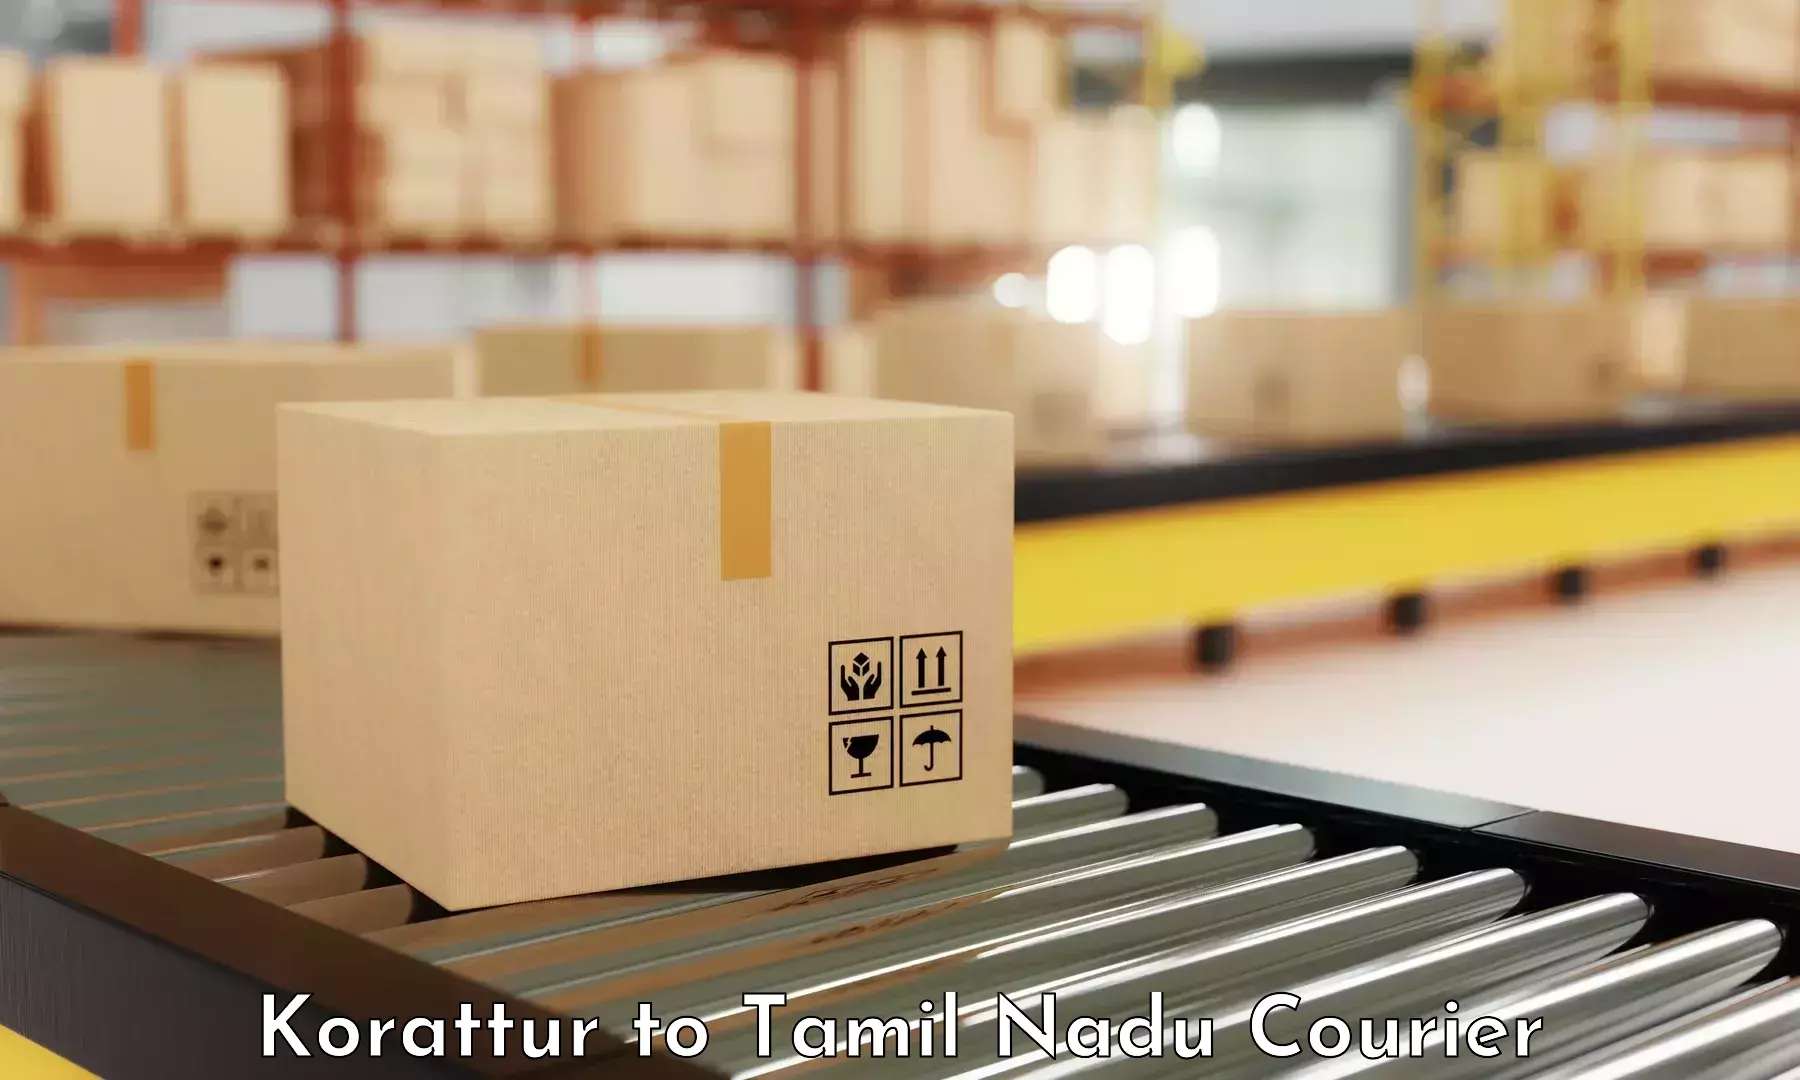 Next-day delivery options Korattur to Vellore Institute of Technology